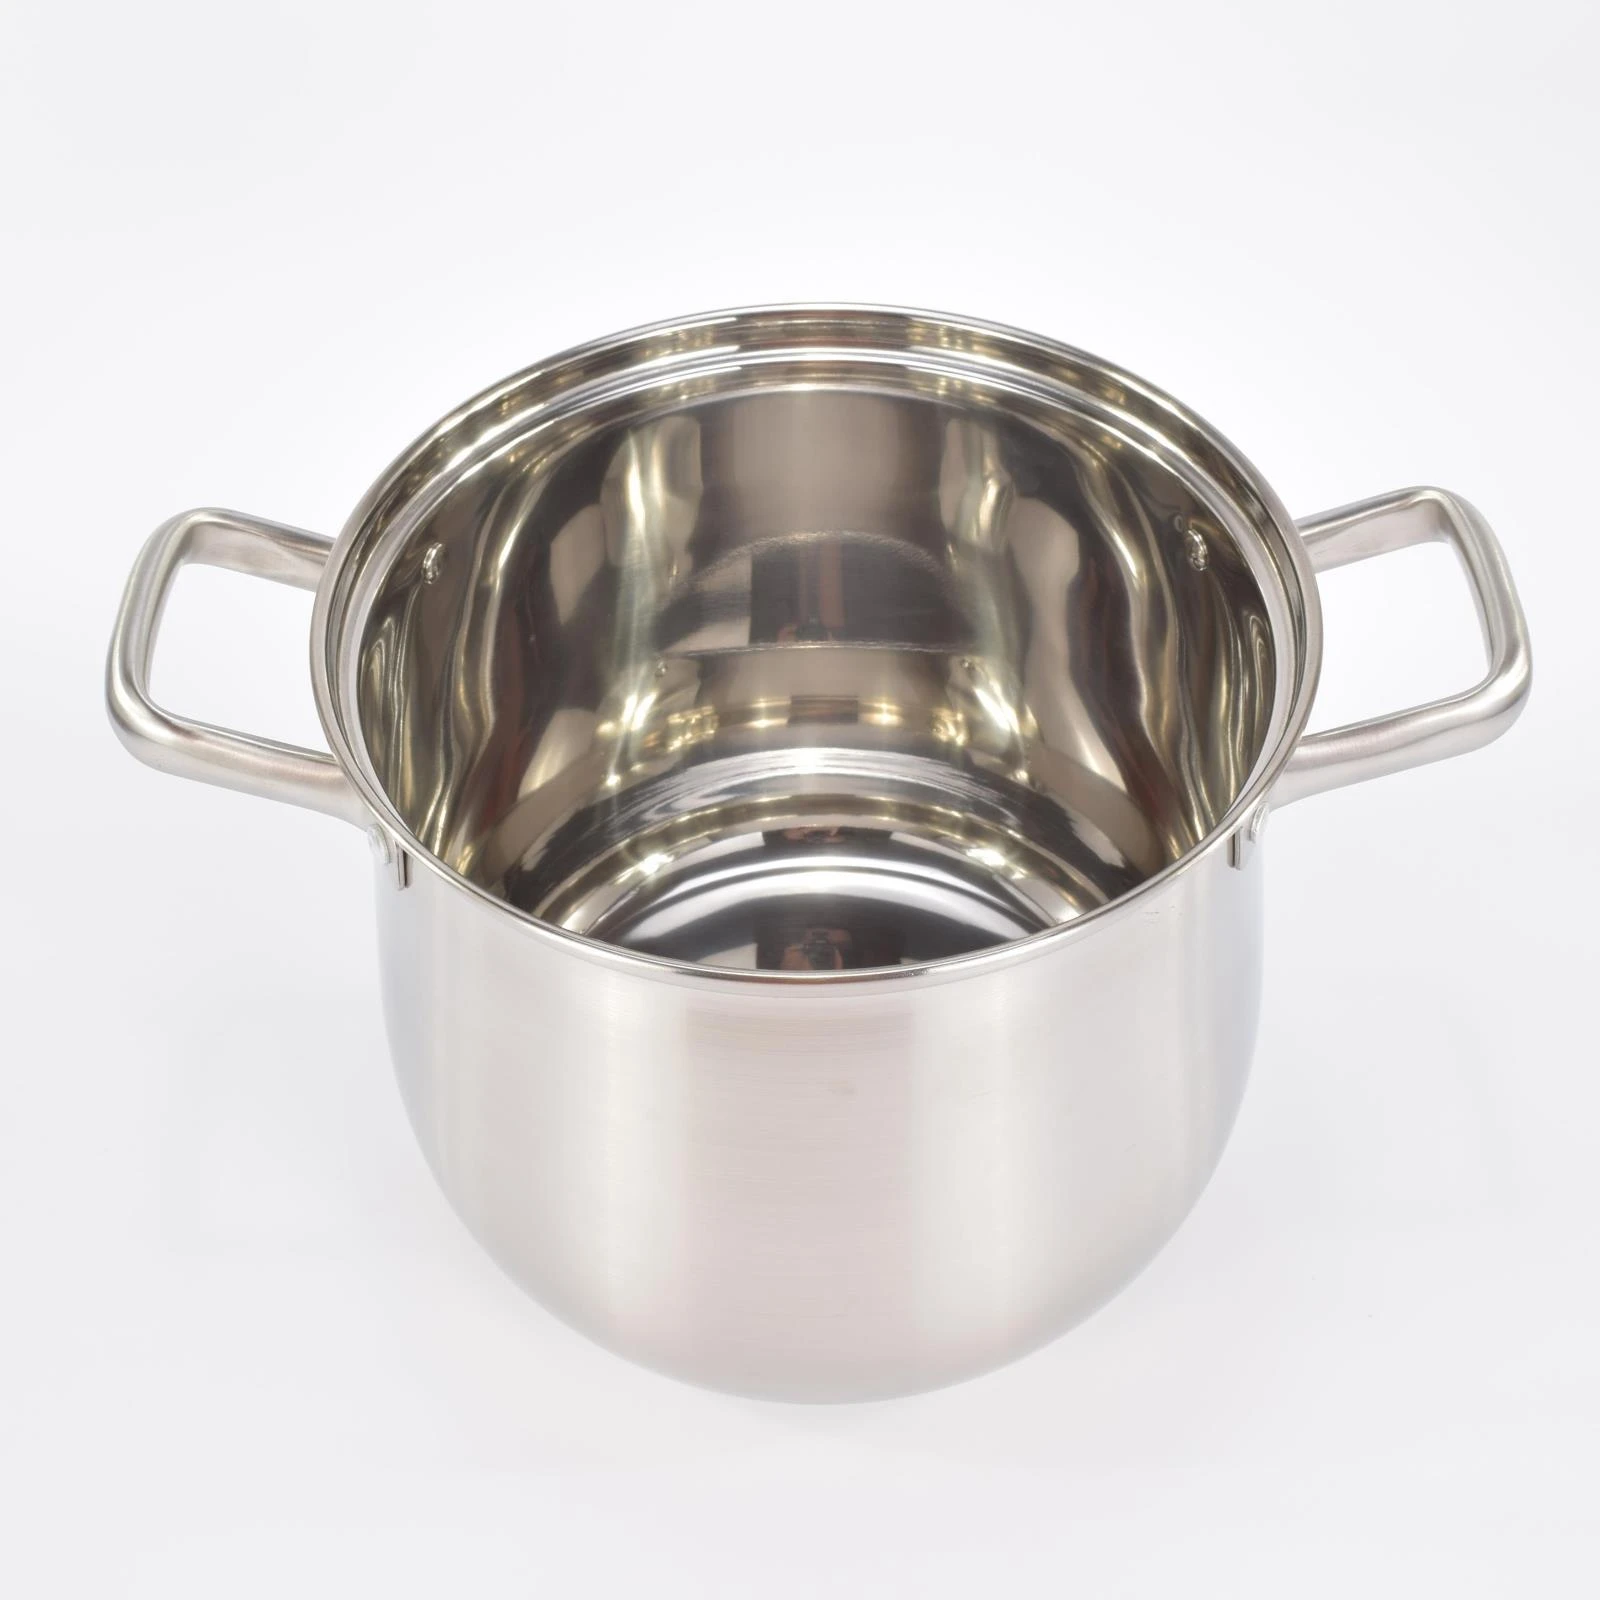 Household Double Bottom Super High Pot Soup Pot 2021 Wholesale Latest Domestic Stainless Steel Soup & Stock Pots Home Cooking